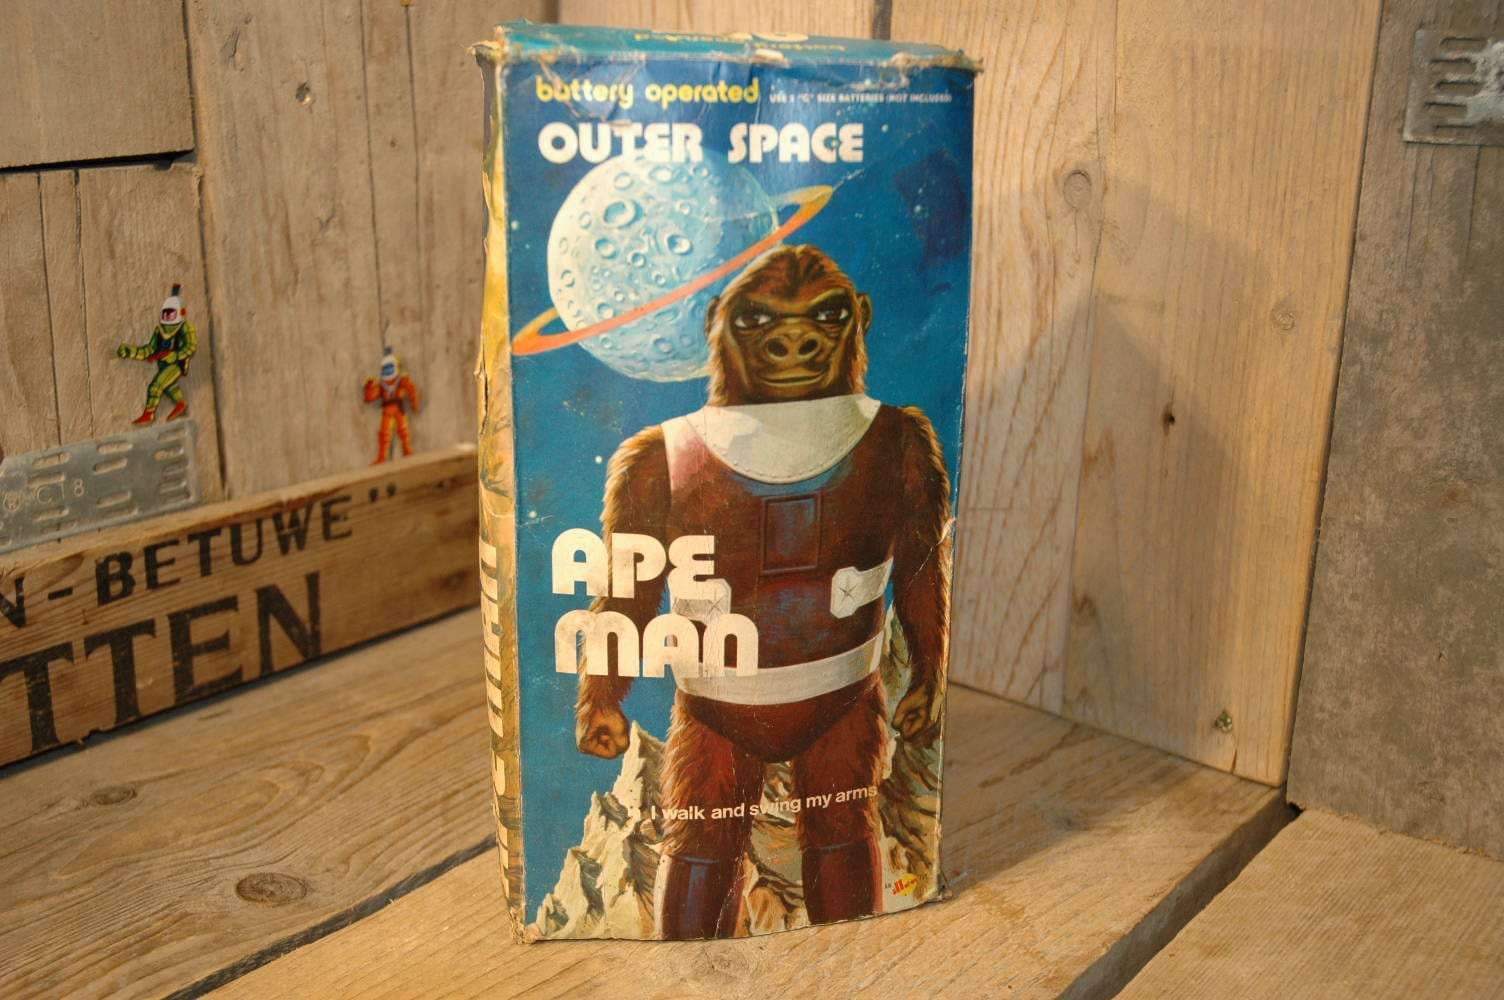 Hong Kong Unknown Manufacturer - Outer Space Ape Man